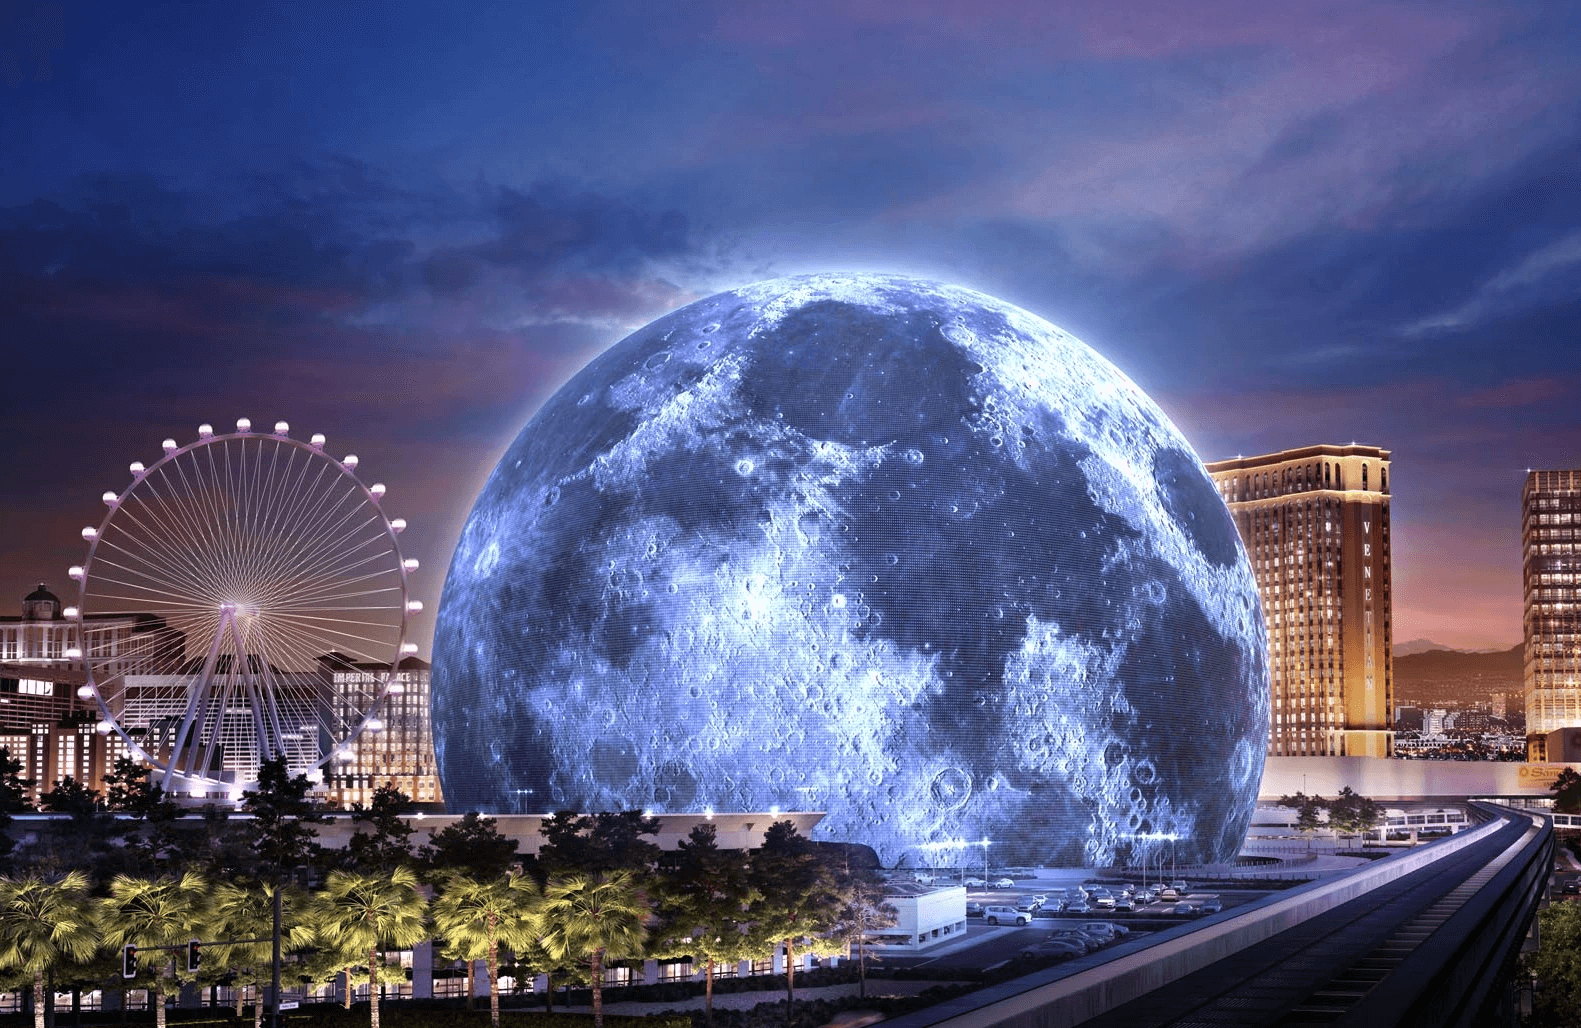 Man arrested after climbing the Sphere in Las Vegas